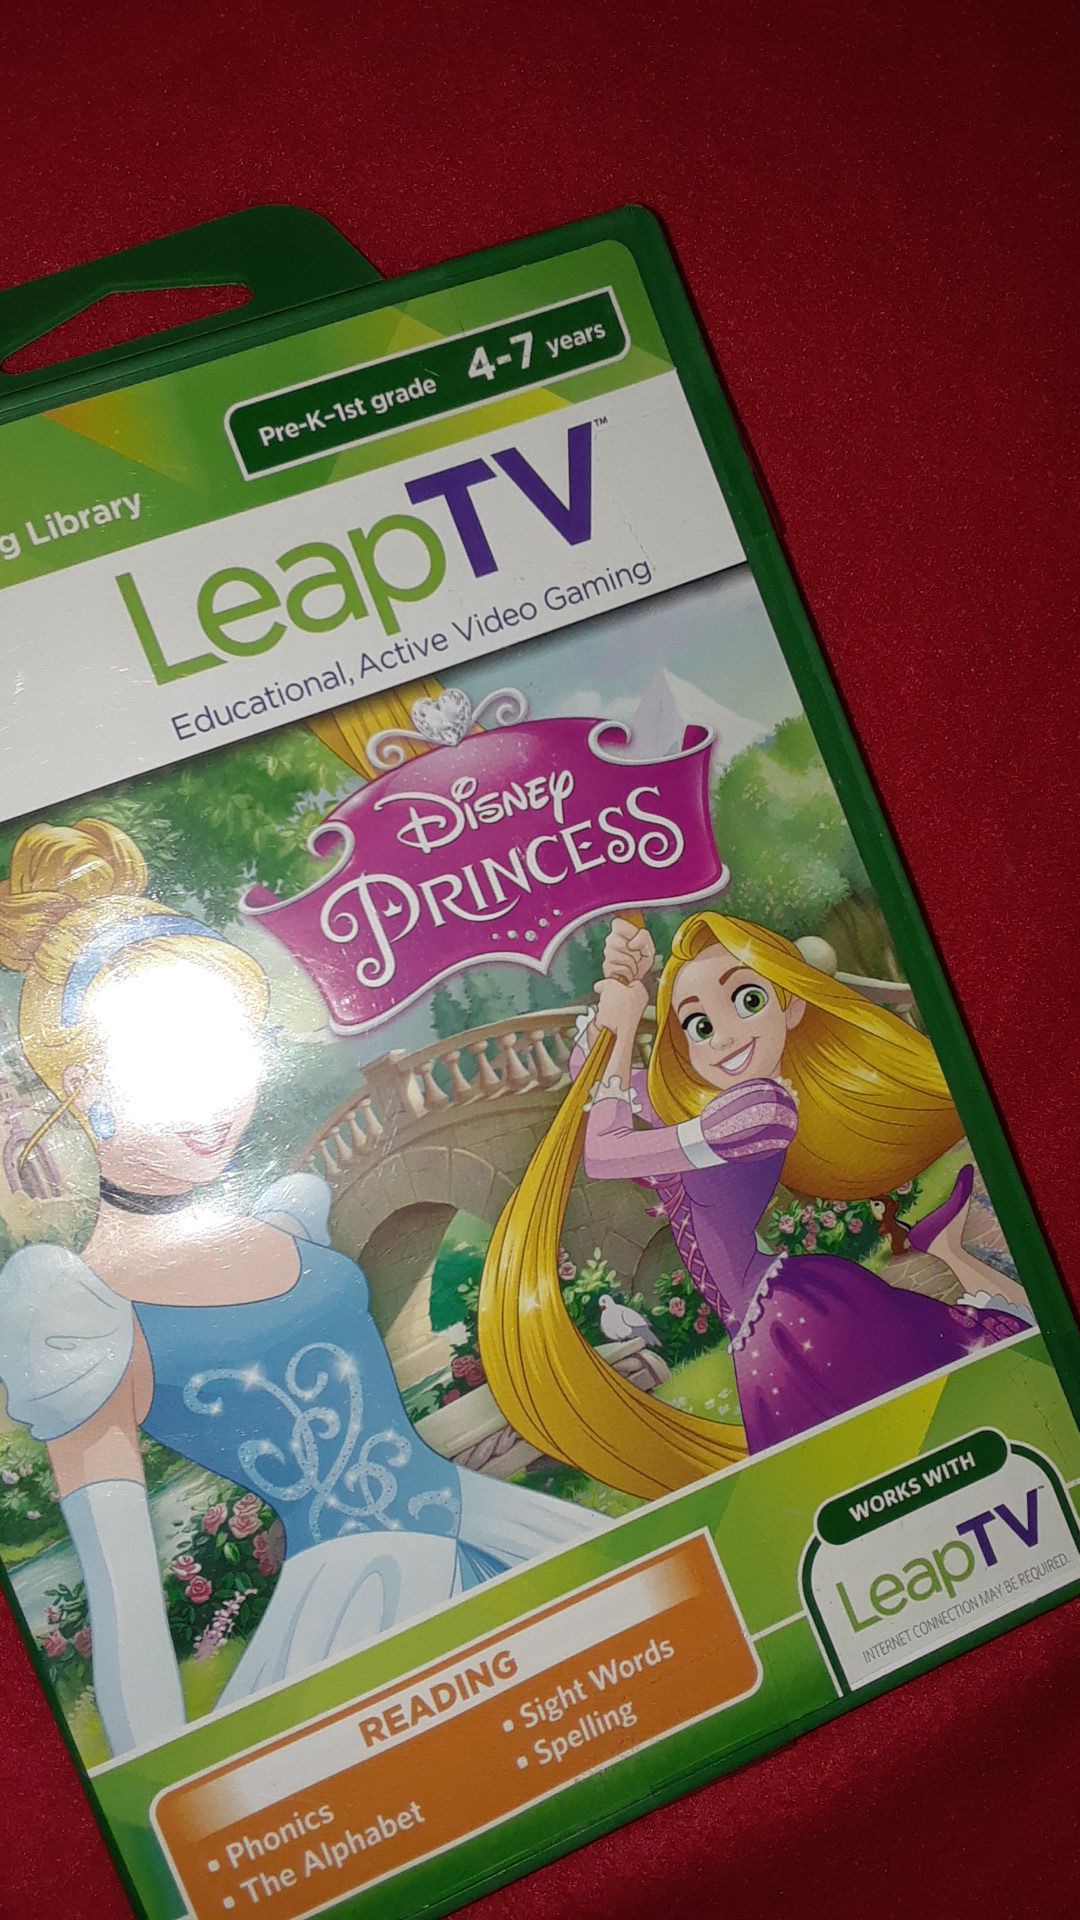 Leap tv learning game kids 4_7 years old